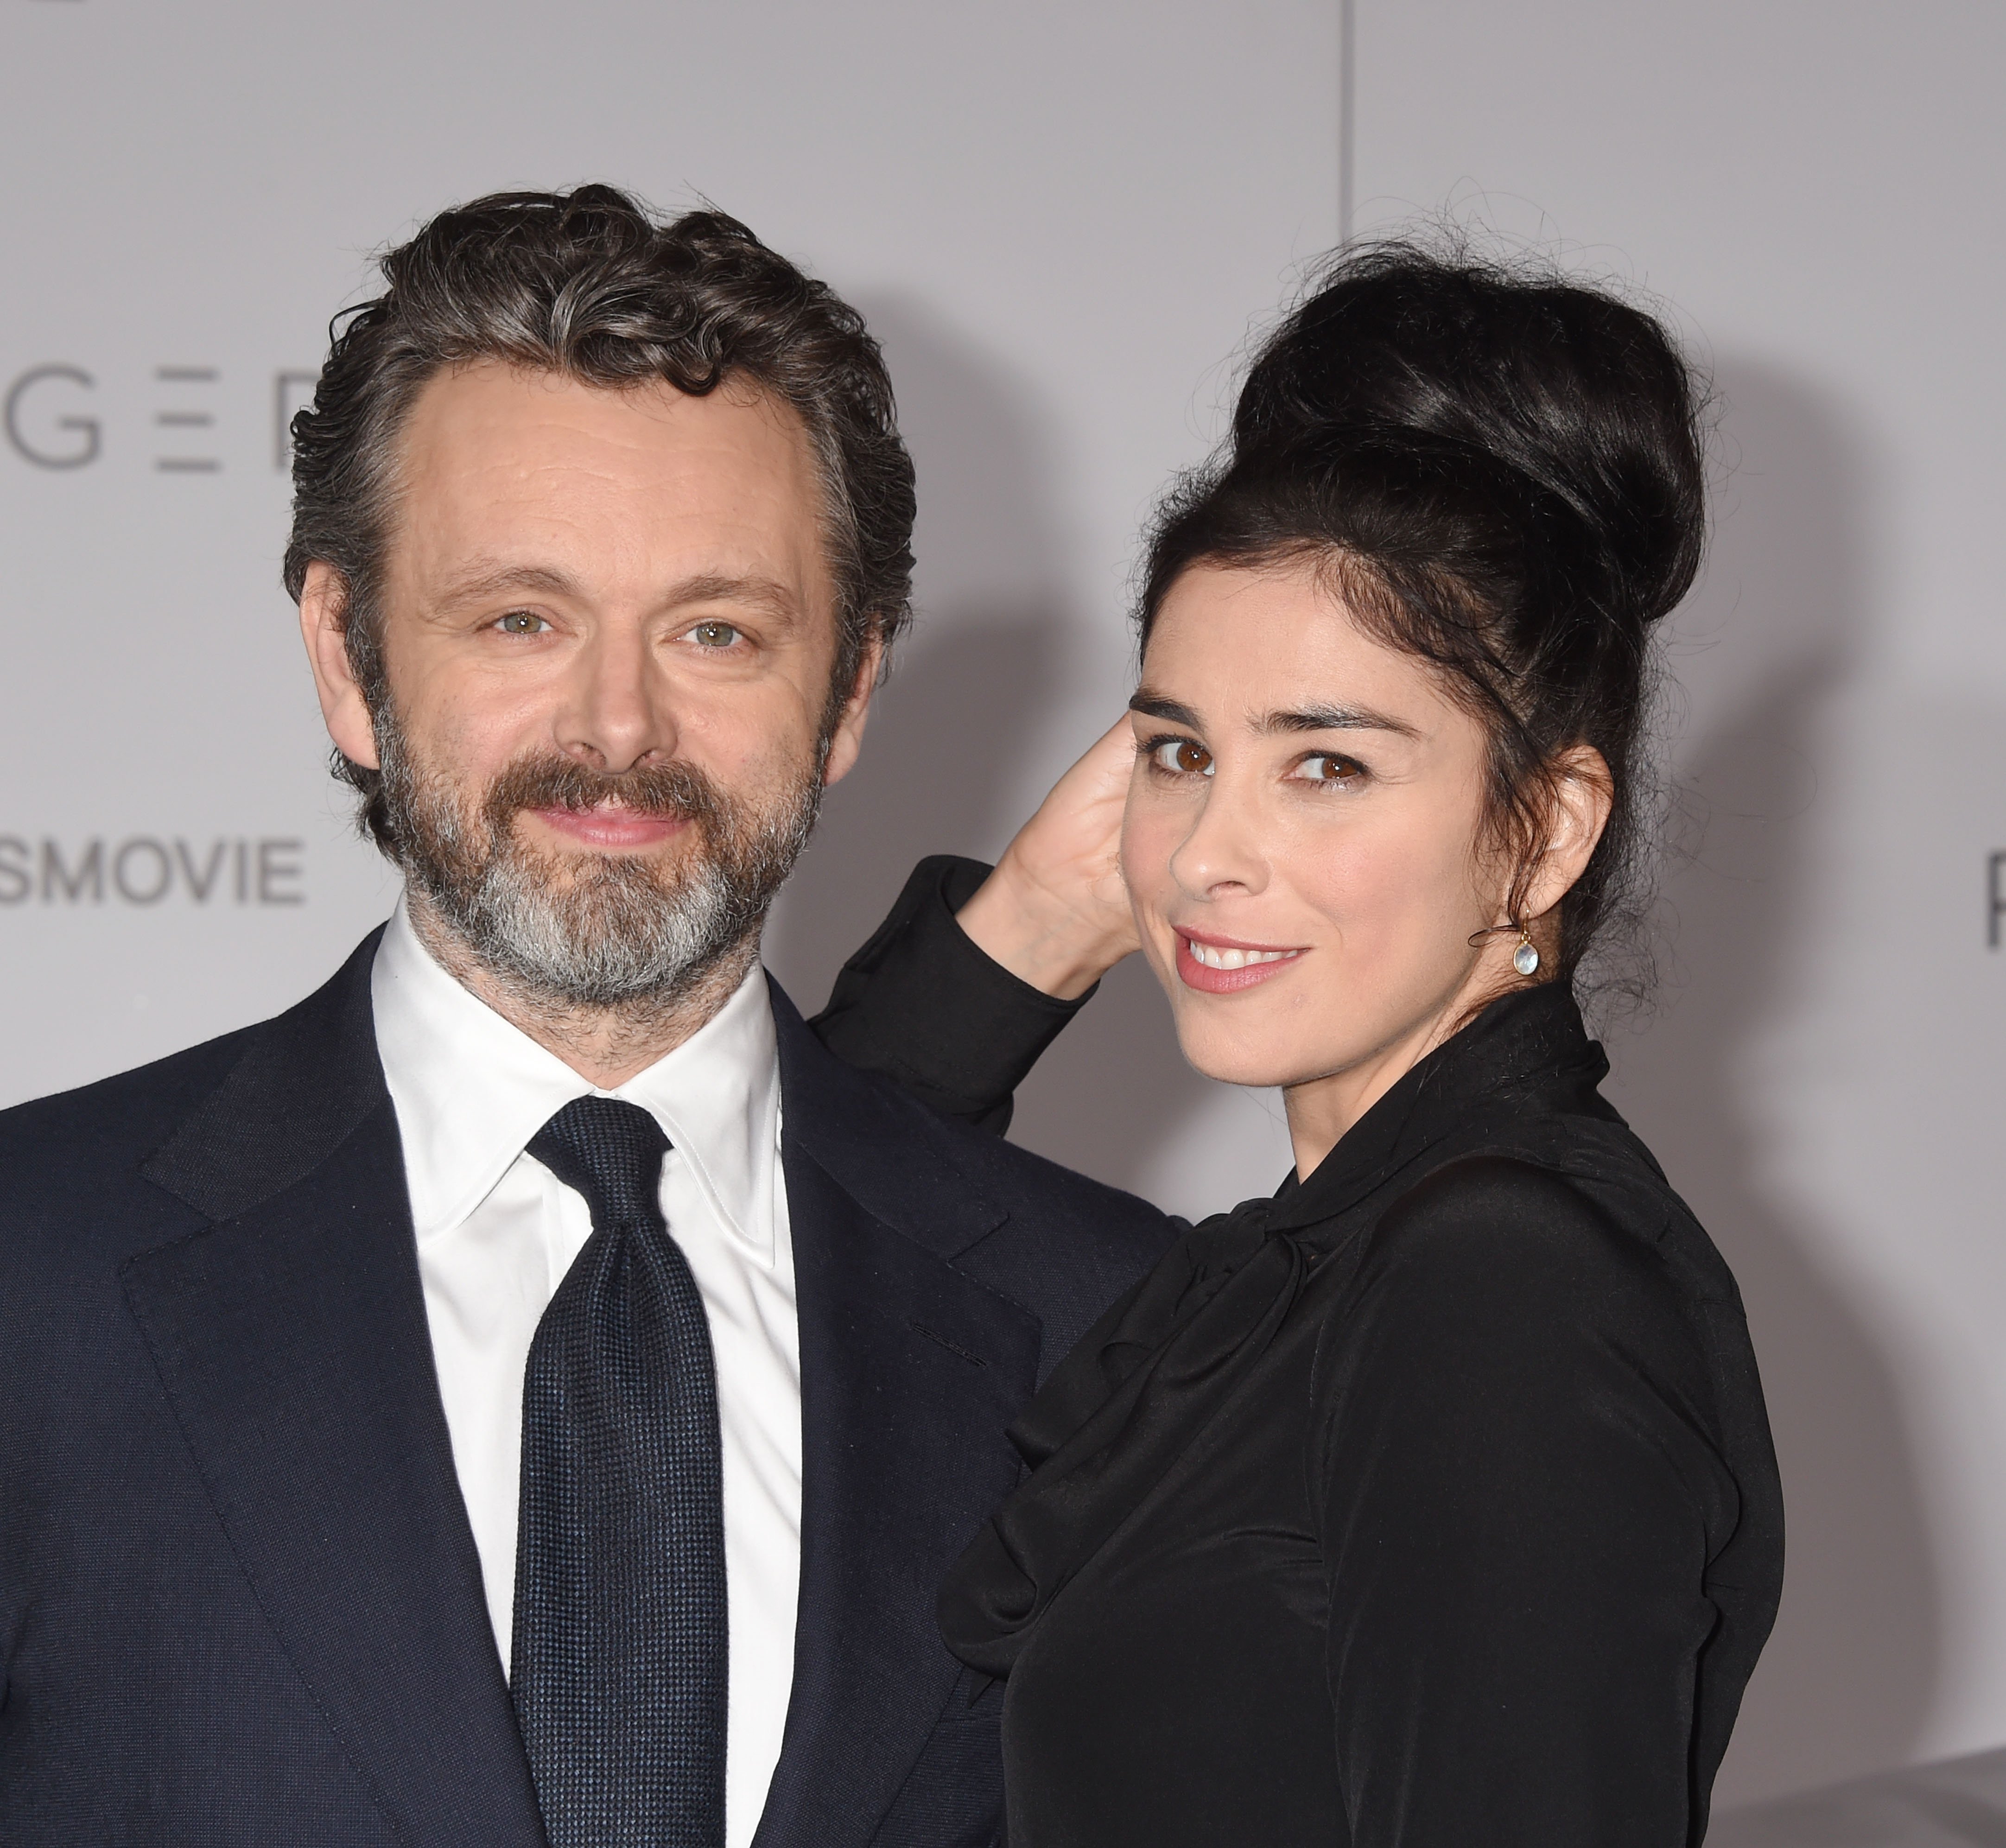 Michael Scenes and Sarah Silverman in Columbia & LT; Pan & Gt; Images of Rory Albanese and Sarah Sarah SaraTre Tre On May 23, 2022 in New York City. |